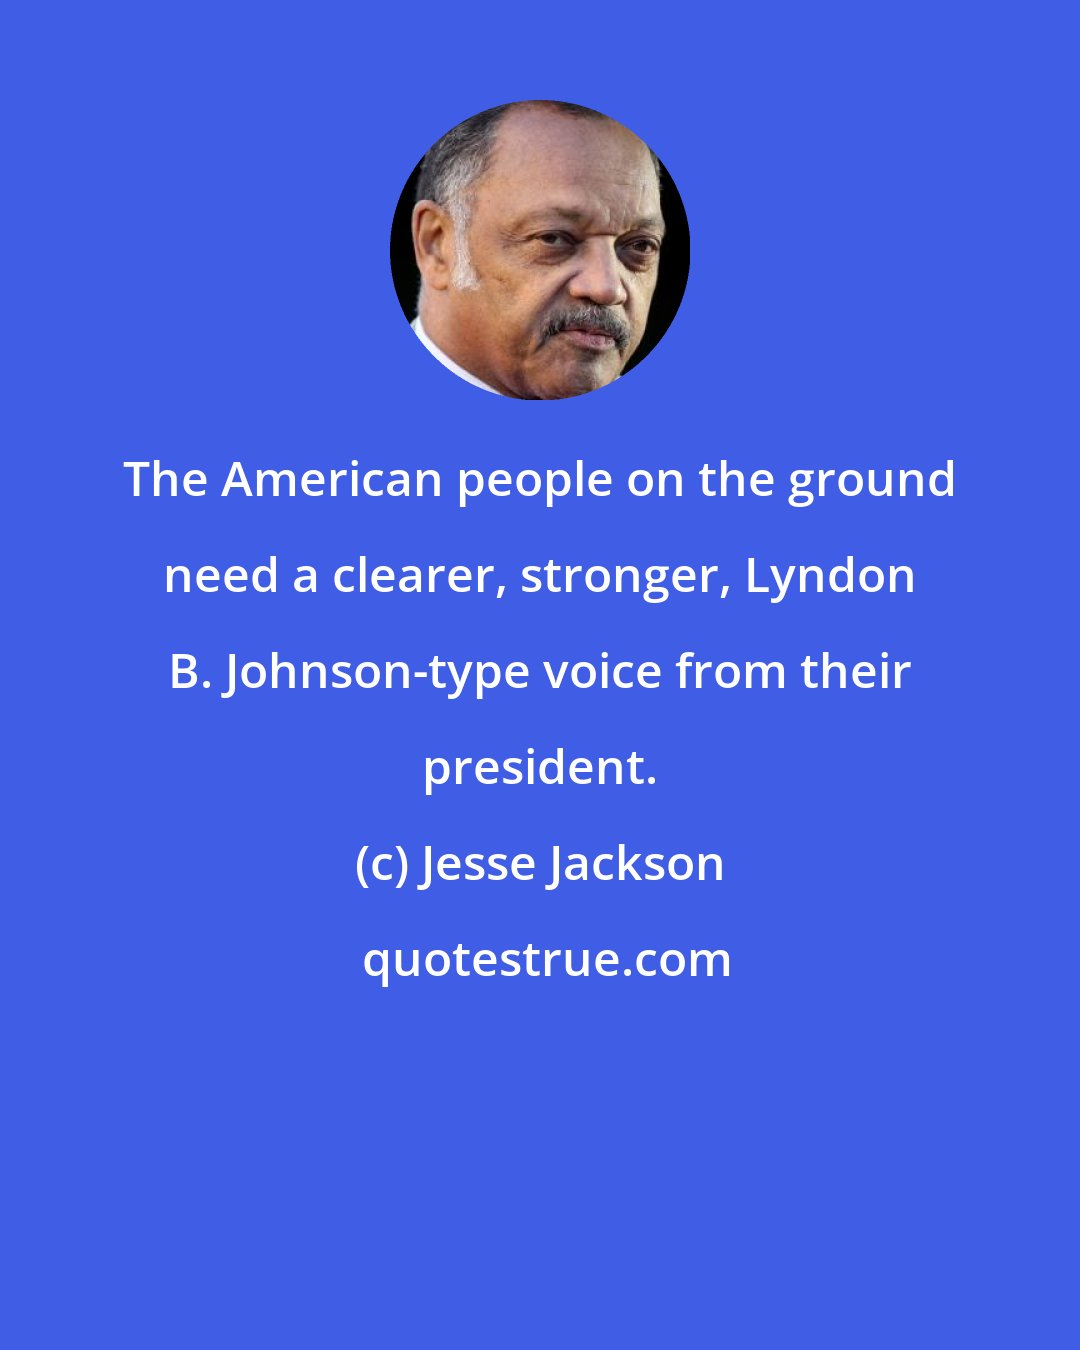 Jesse Jackson: The American people on the ground need a clearer, stronger, Lyndon B. Johnson-type voice from their president.